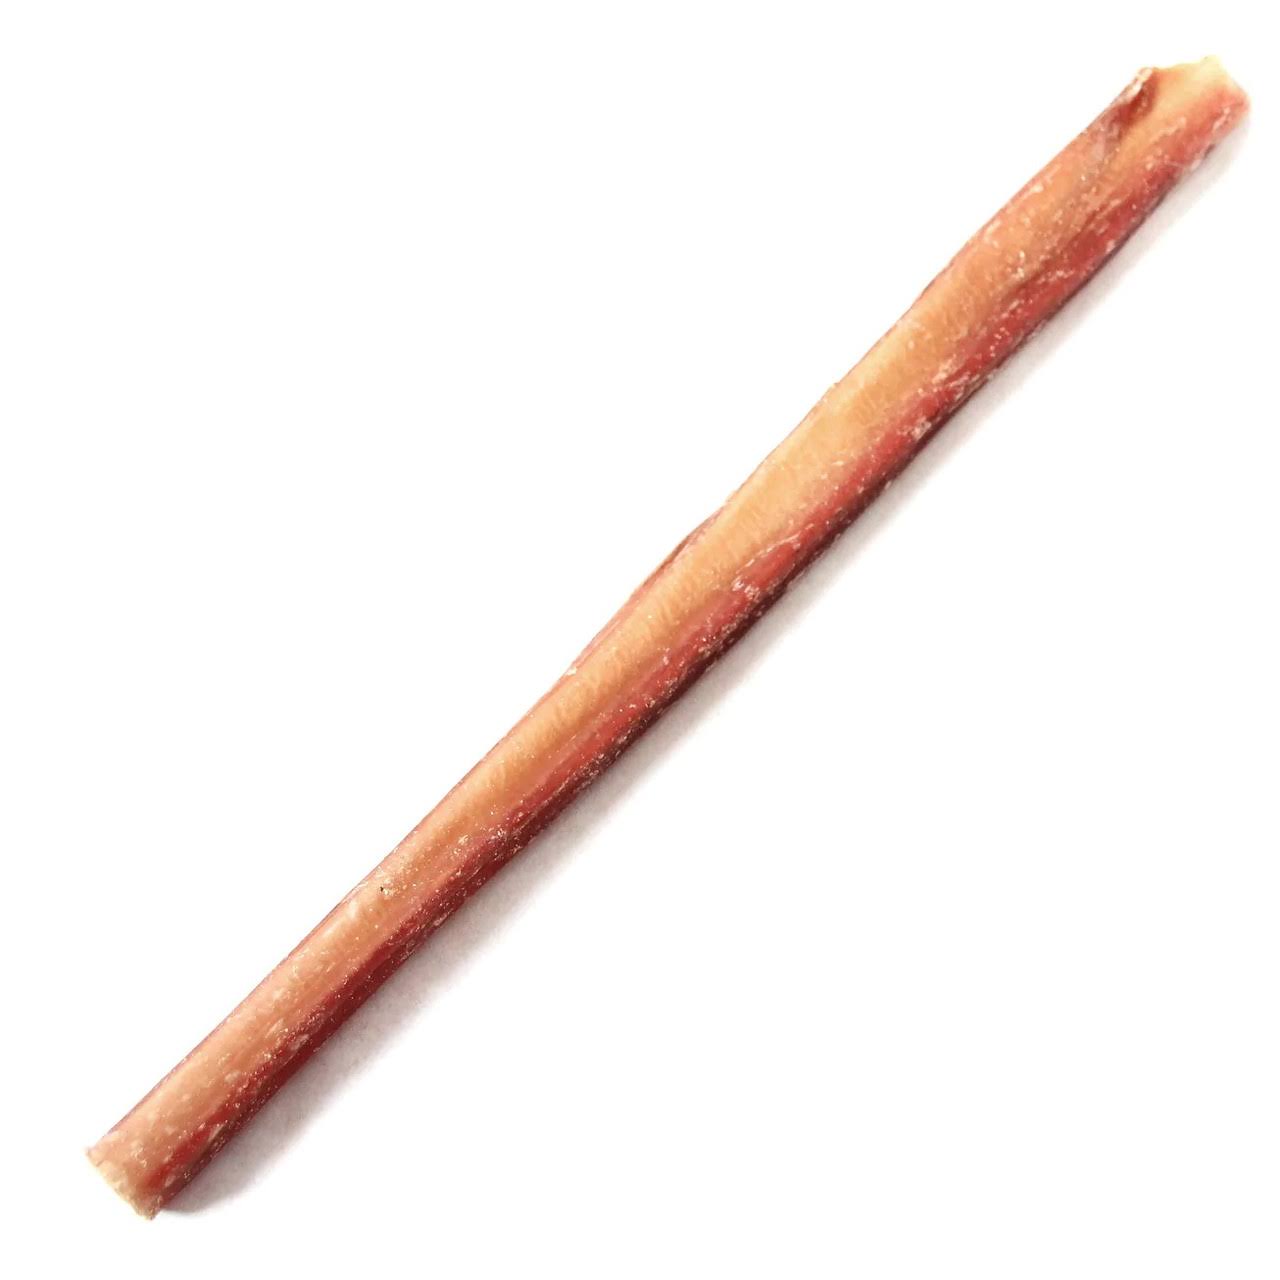 Tomlinson's Feed Thick Bully Stick, 12-Inch / 12 inch